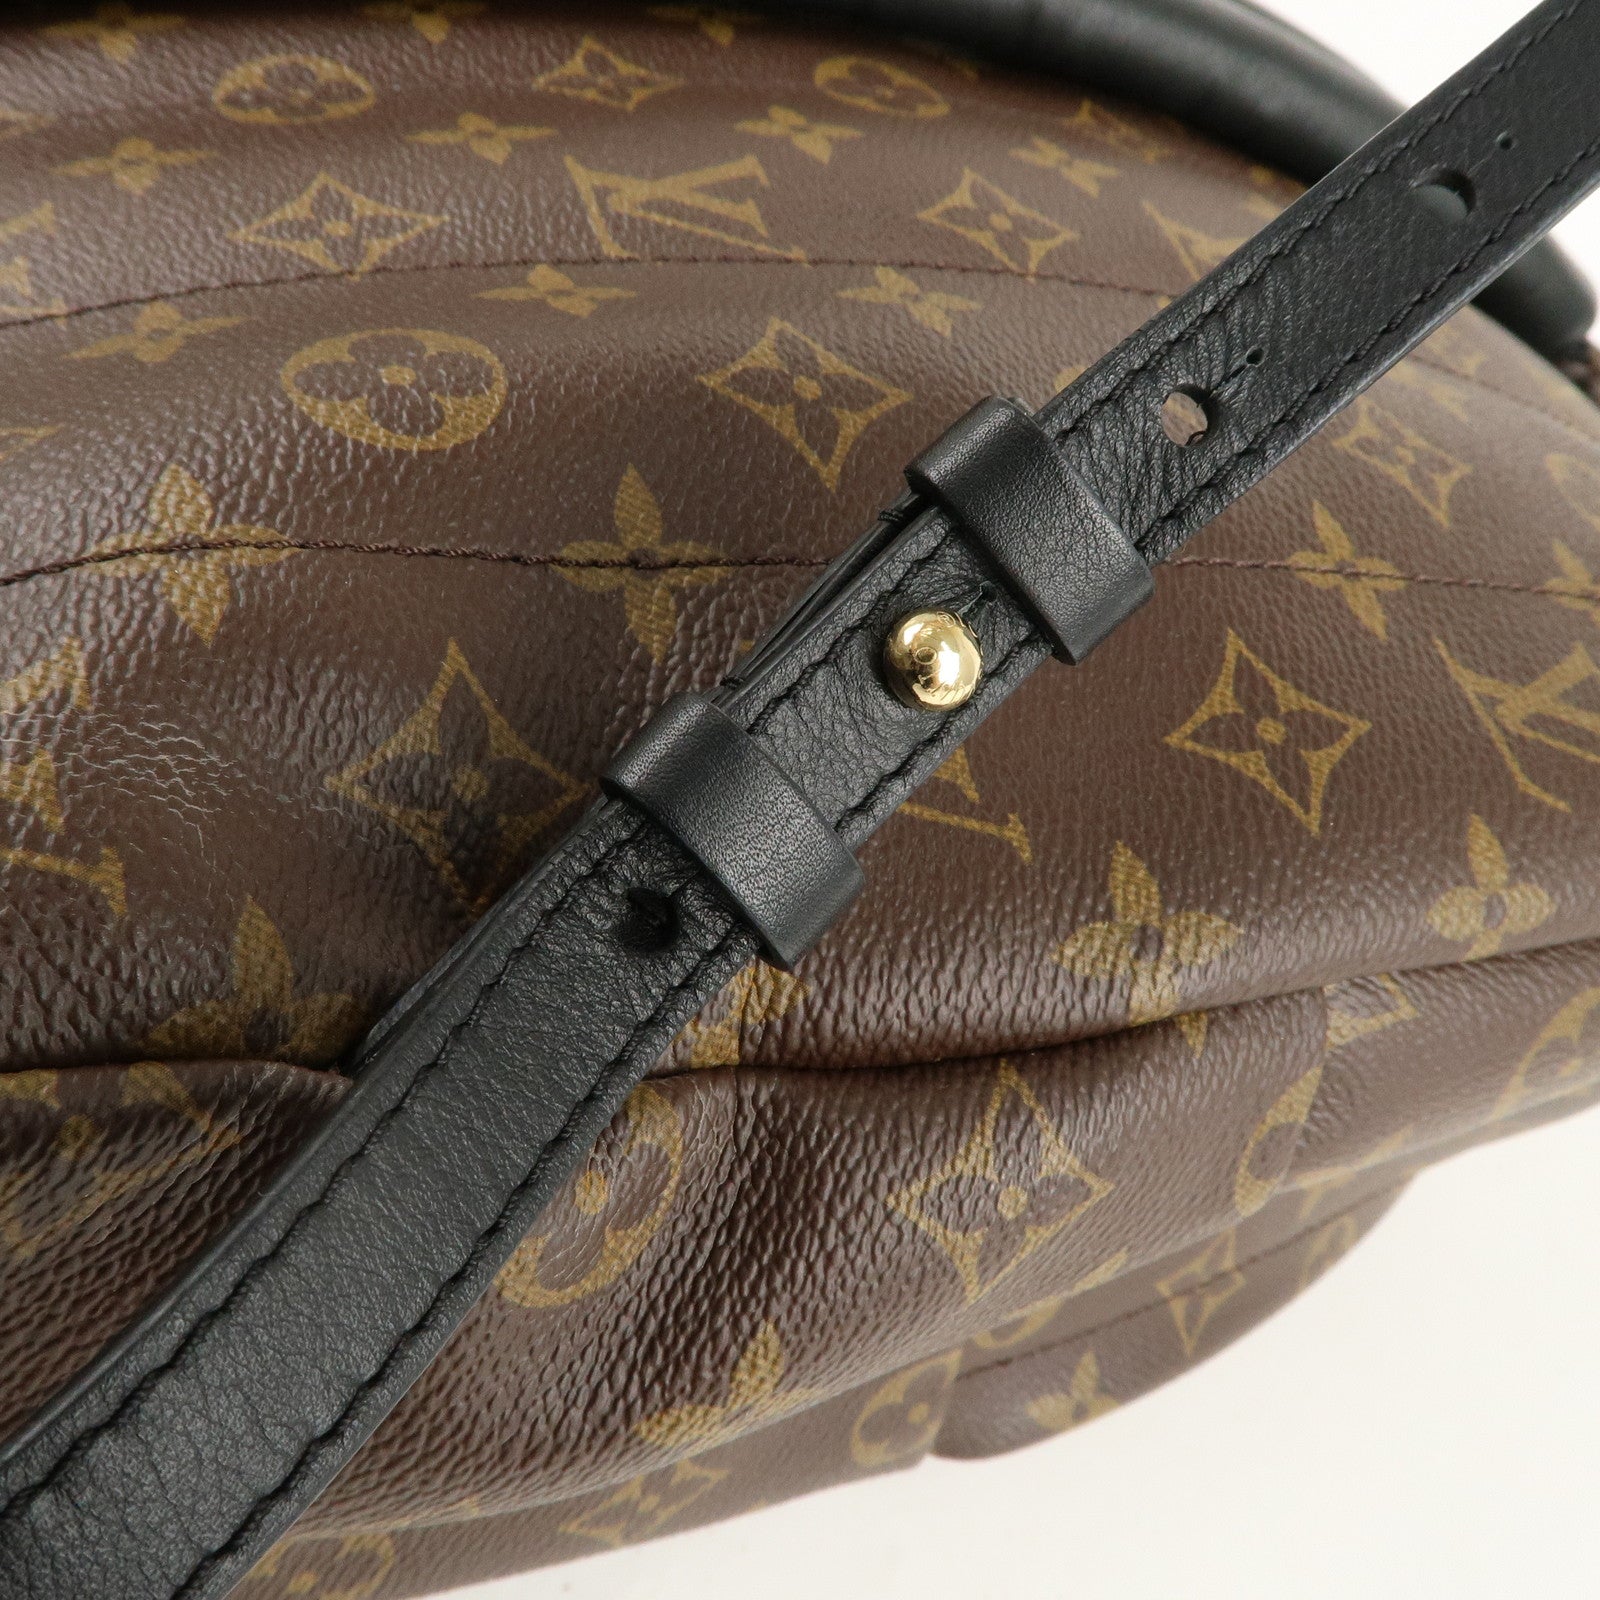 ATTENTION!* LOUIS VUITTON CRACKING CANVAS (again, LV?!) + SELLING